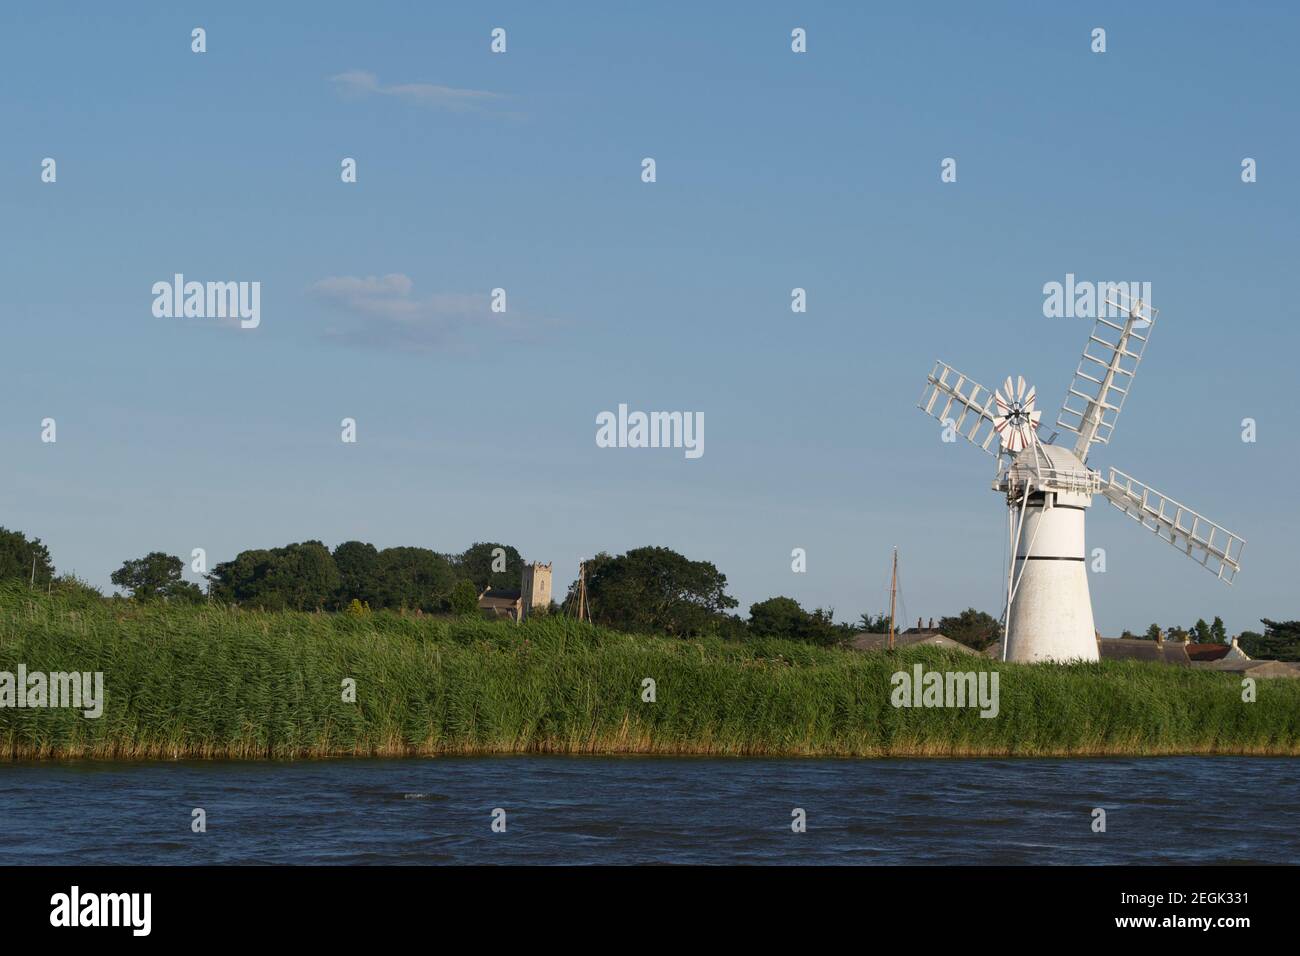 A vivid white windmill (wind pump) standing in green reedbeds on the bank of a blue river. Bright summer colours; waterside scene. Stock Photo